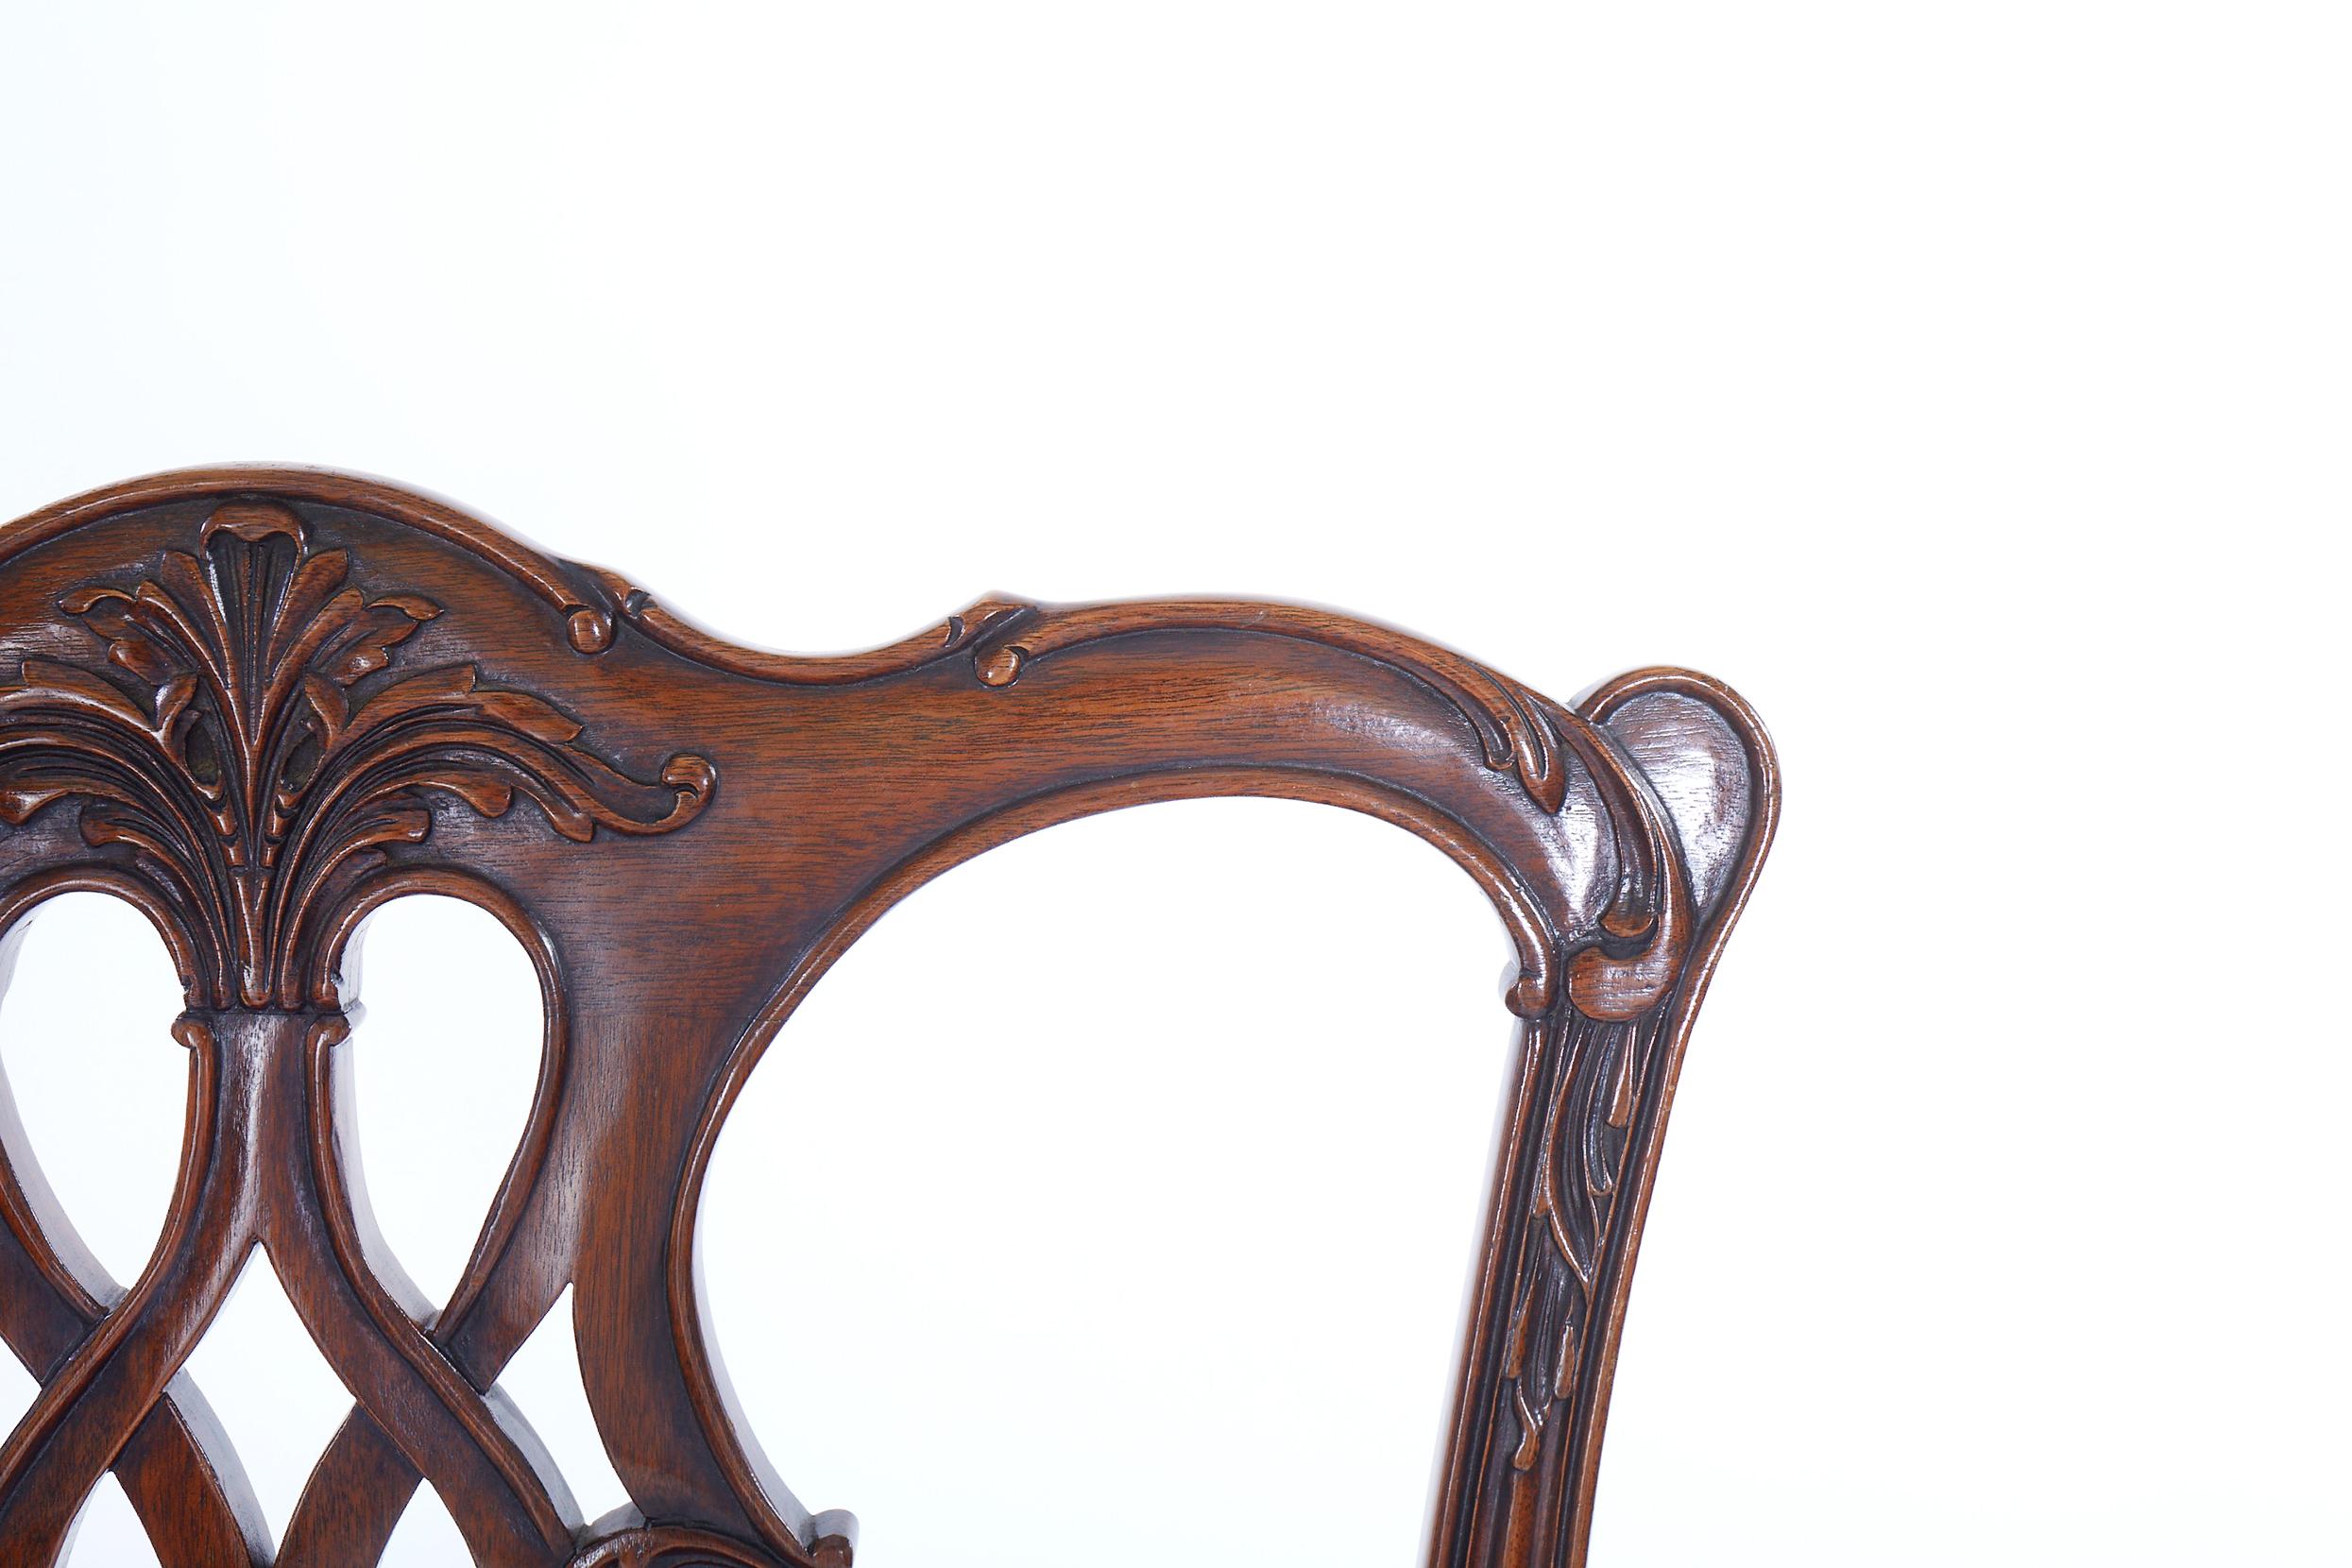 Beautifully hand carved mahogany wood set of 8 dining chairs. The set consist of six side chairs and two armchairs. Constructed in mahogany, which has been excellently and comprehensively hand carved in the chippendale style. Each chair is in great